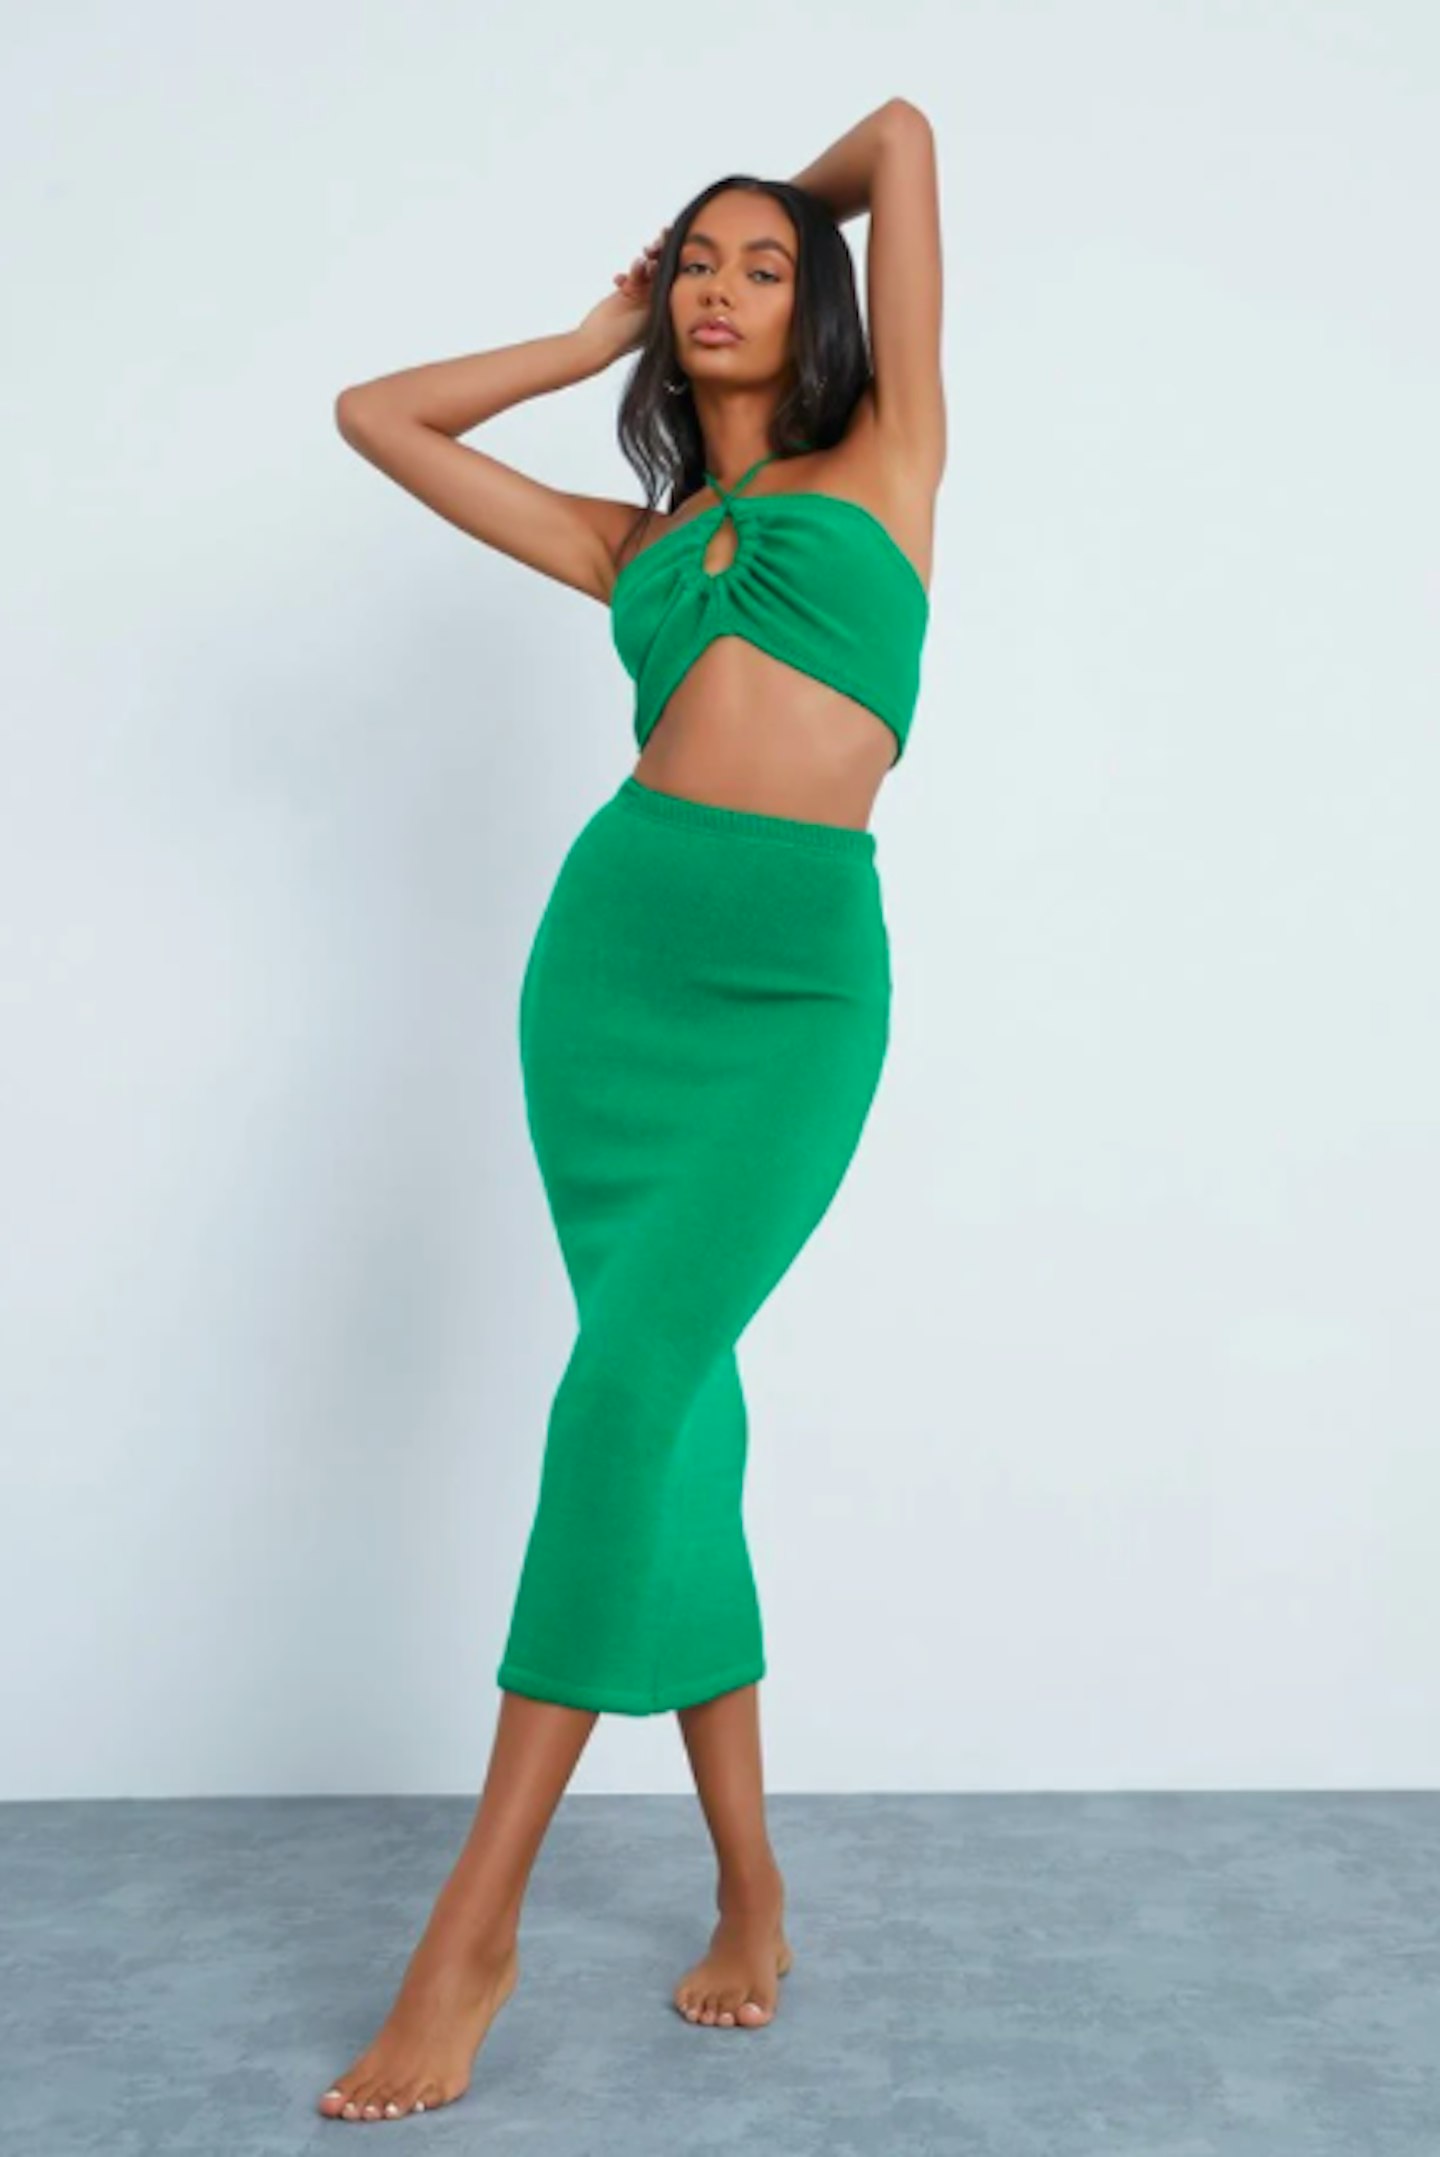 Green Knitted Halter Neck Bandeau Top Matching Midi Skirt Green Knitted Halter Neck Bandeau Top Matching Midi Skirt Green Knitted Halter Neck Bandeau Top Matching Midi Skirt Green Knitted Halter Neck Bandeau Top Matching Midi Skirt £38.50 | CODE: NEW30 Green Knitted Halter Neck Bandeau Top Matching Midi Skirt